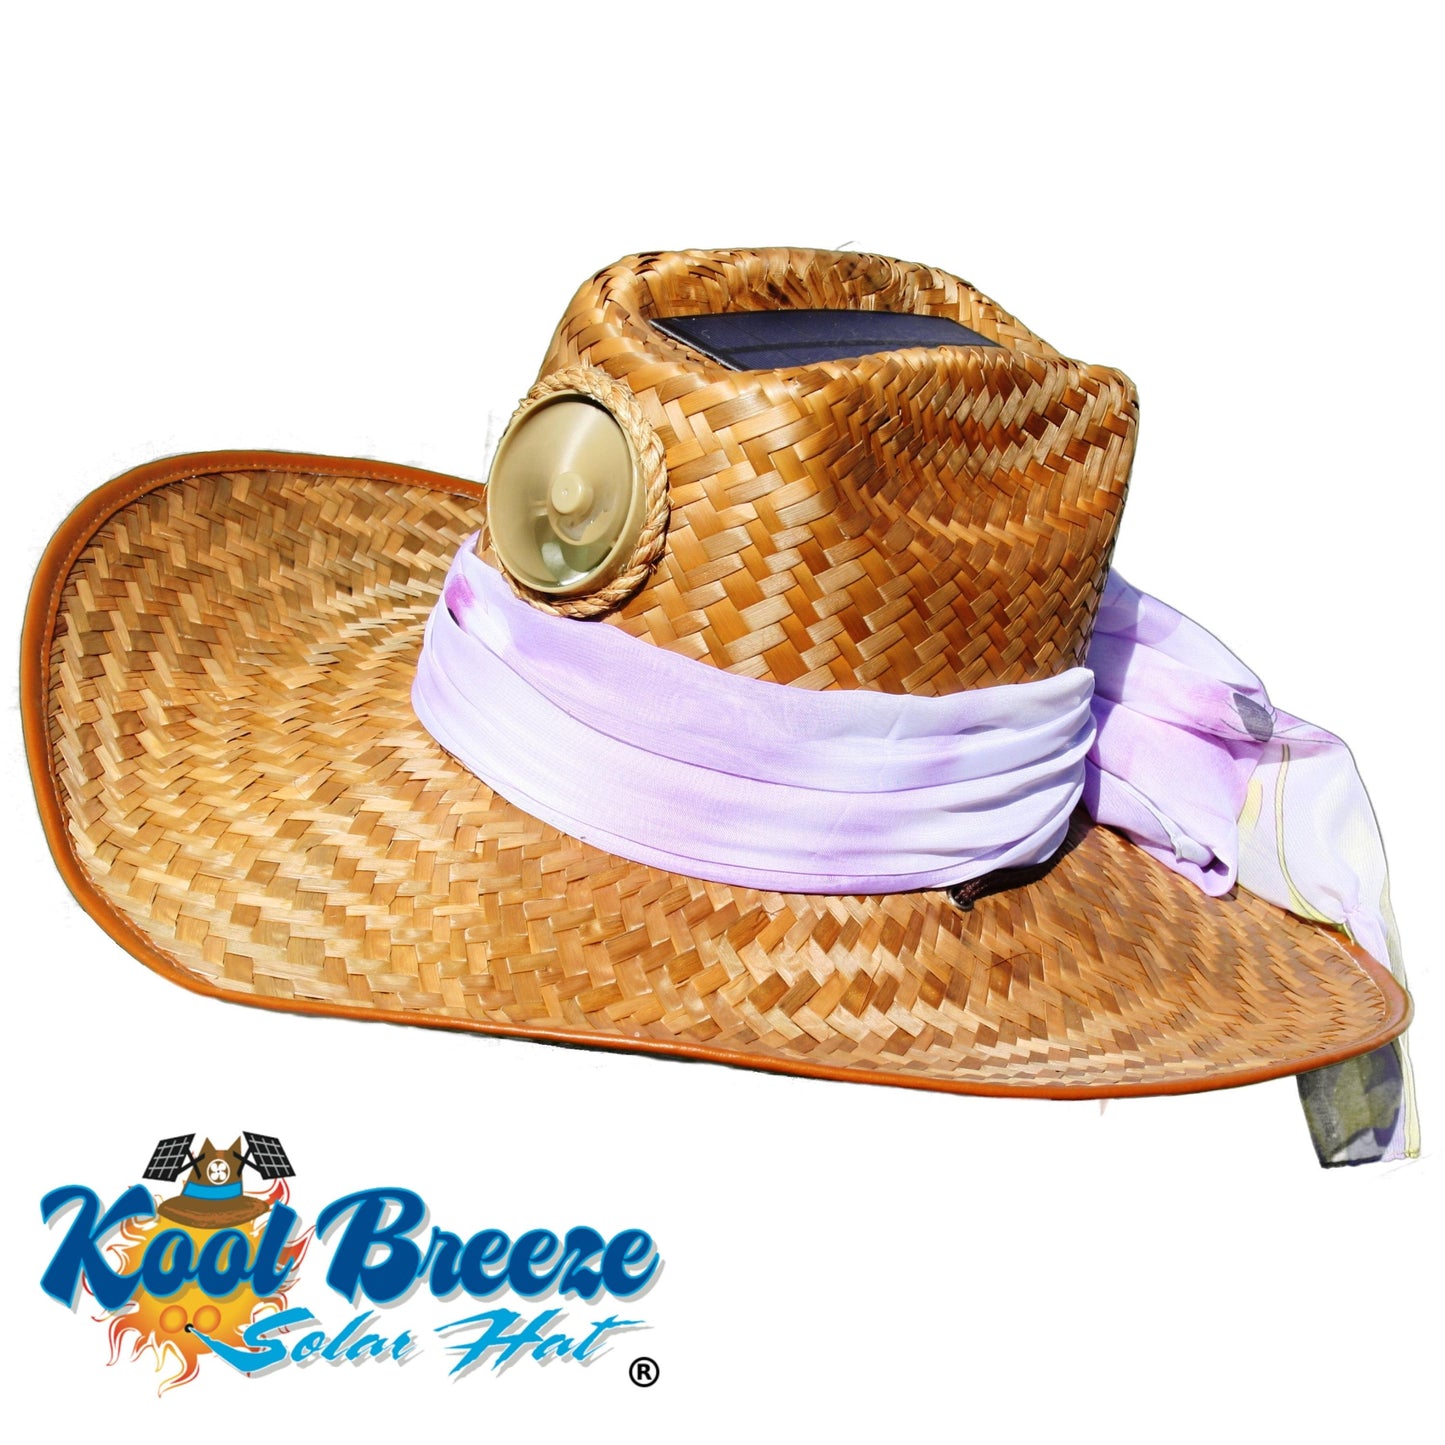 Cowgirl with Starter Scarf Solar Hat (Color Of Scarfs Could Vary)